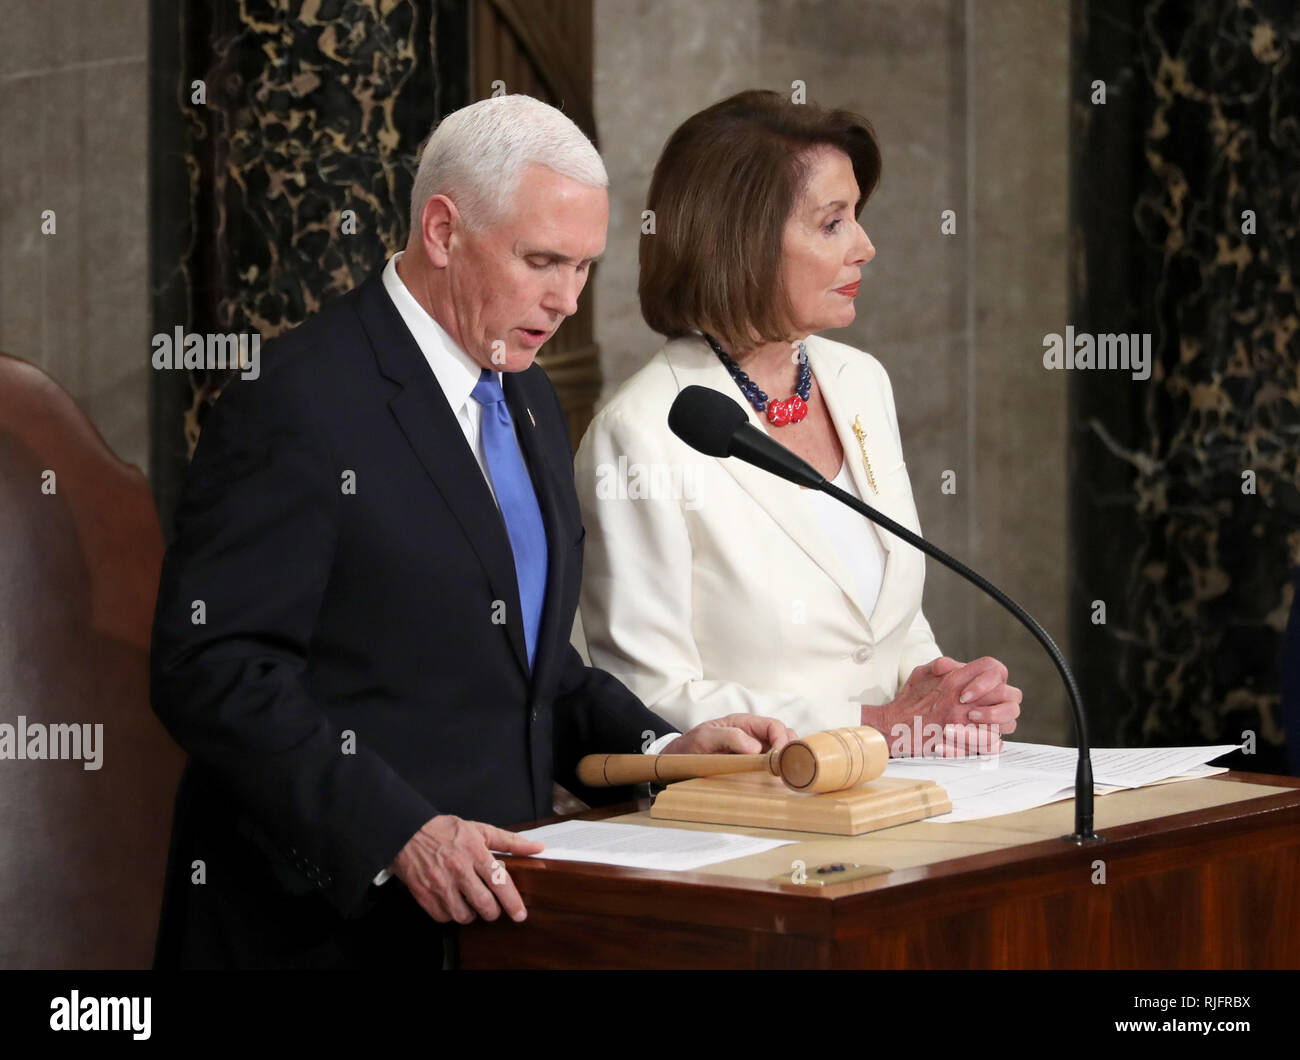 Washington, United States Of America. 05th Feb, 2019. United States Vice President Mike Pence, left, and Speaker of the US House of Representatives Nancy Pelosi (Democrat of California) prior to US President Donald J. Trump delivering his second annual State of the Union Address to a joint session of the US Congress in the US Capitol in Washington, DC on Tuesday, February 5, 2019. Credit: Alex Edelman/CNP | usage worldwide Credit: dpa/Alamy Live News Stock Photo